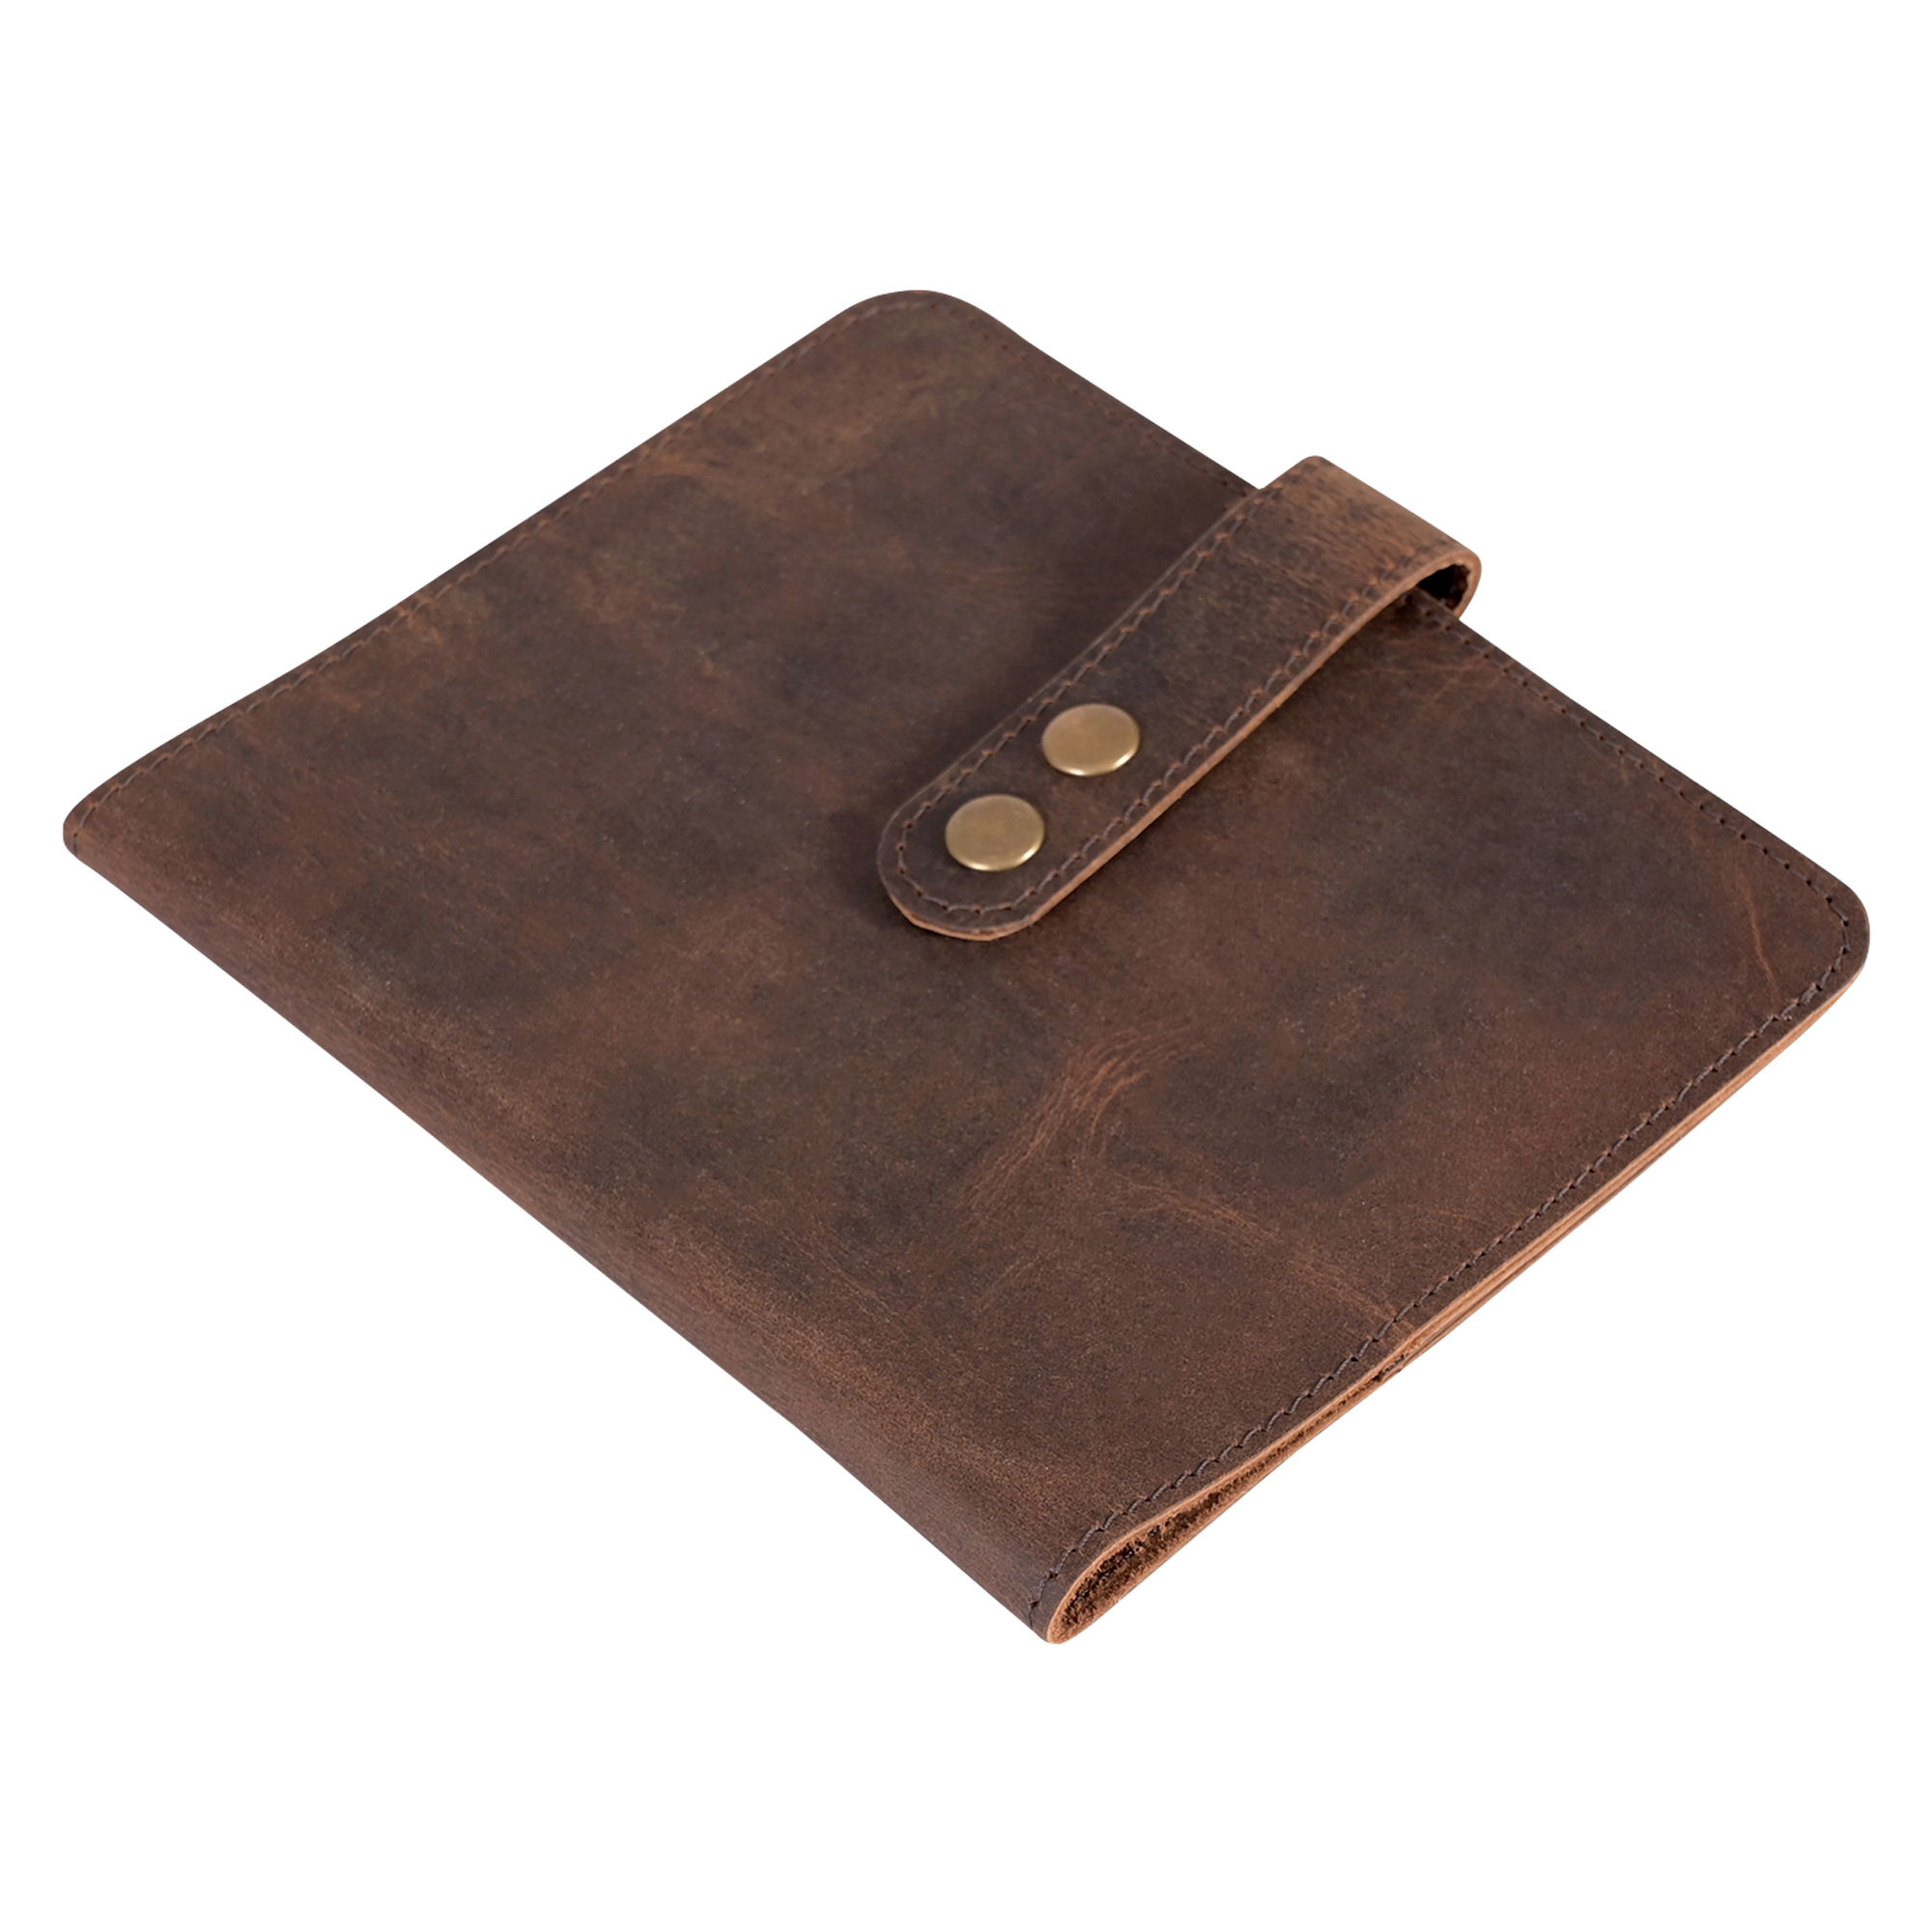 Small Compact Leather Bible Cover